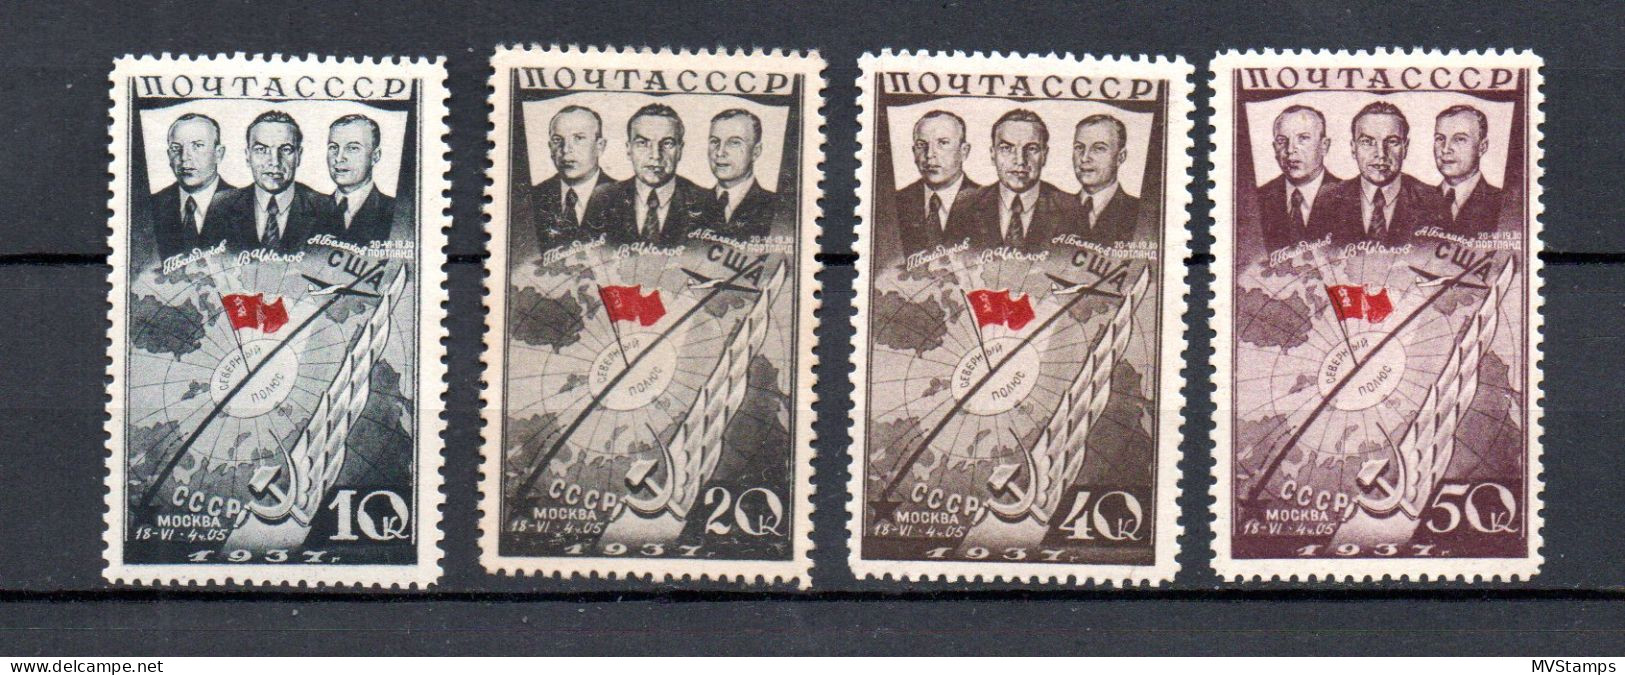 Russia 1938 Old Set Polar-Flight Moscow-Portland Stamps (Michel 595/98) Nice MLH - Nuovi